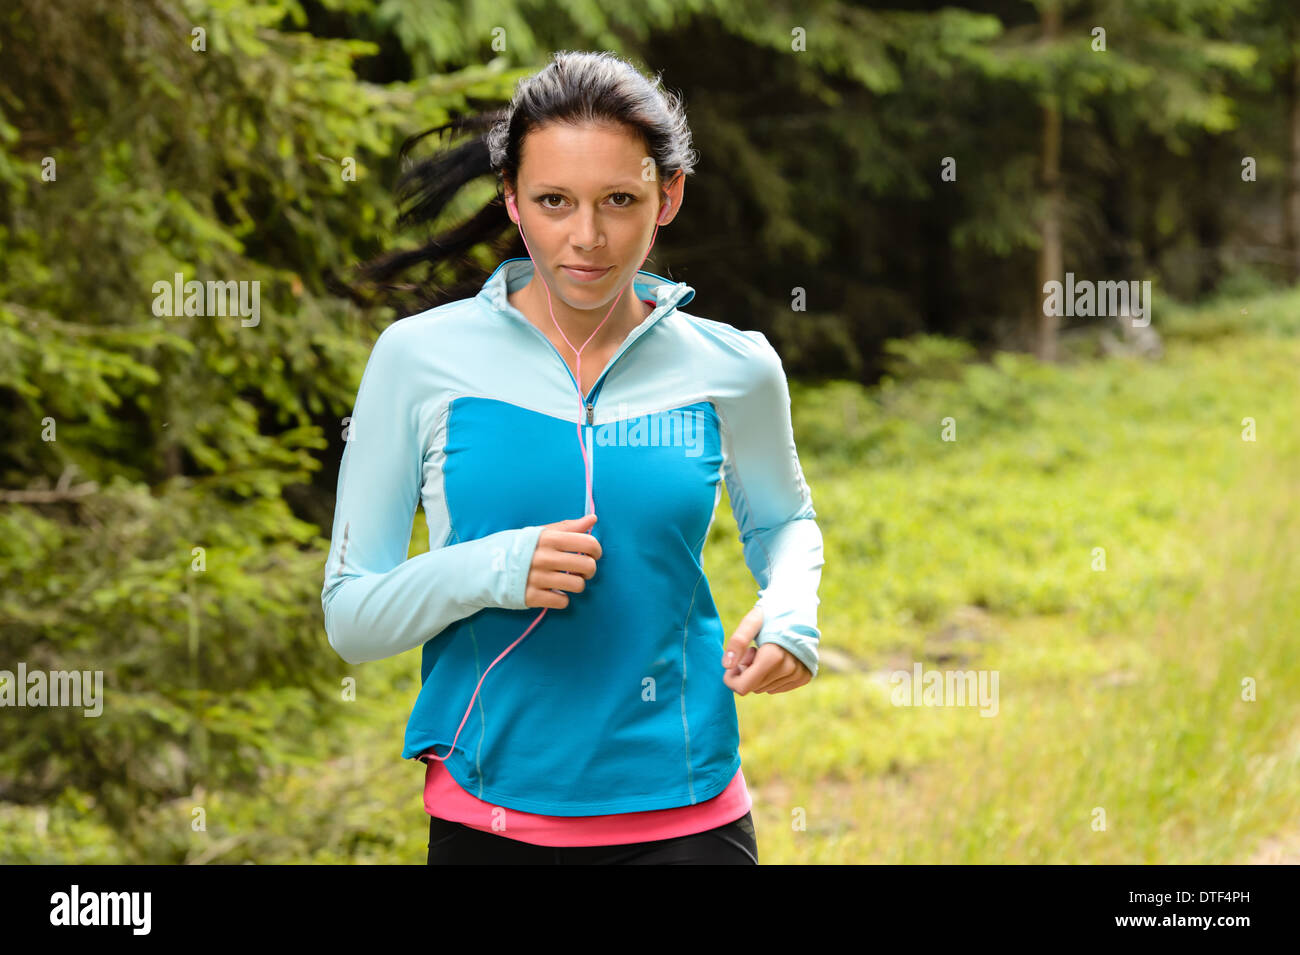 Running woman in forest fitness training outdoor Stock Photo